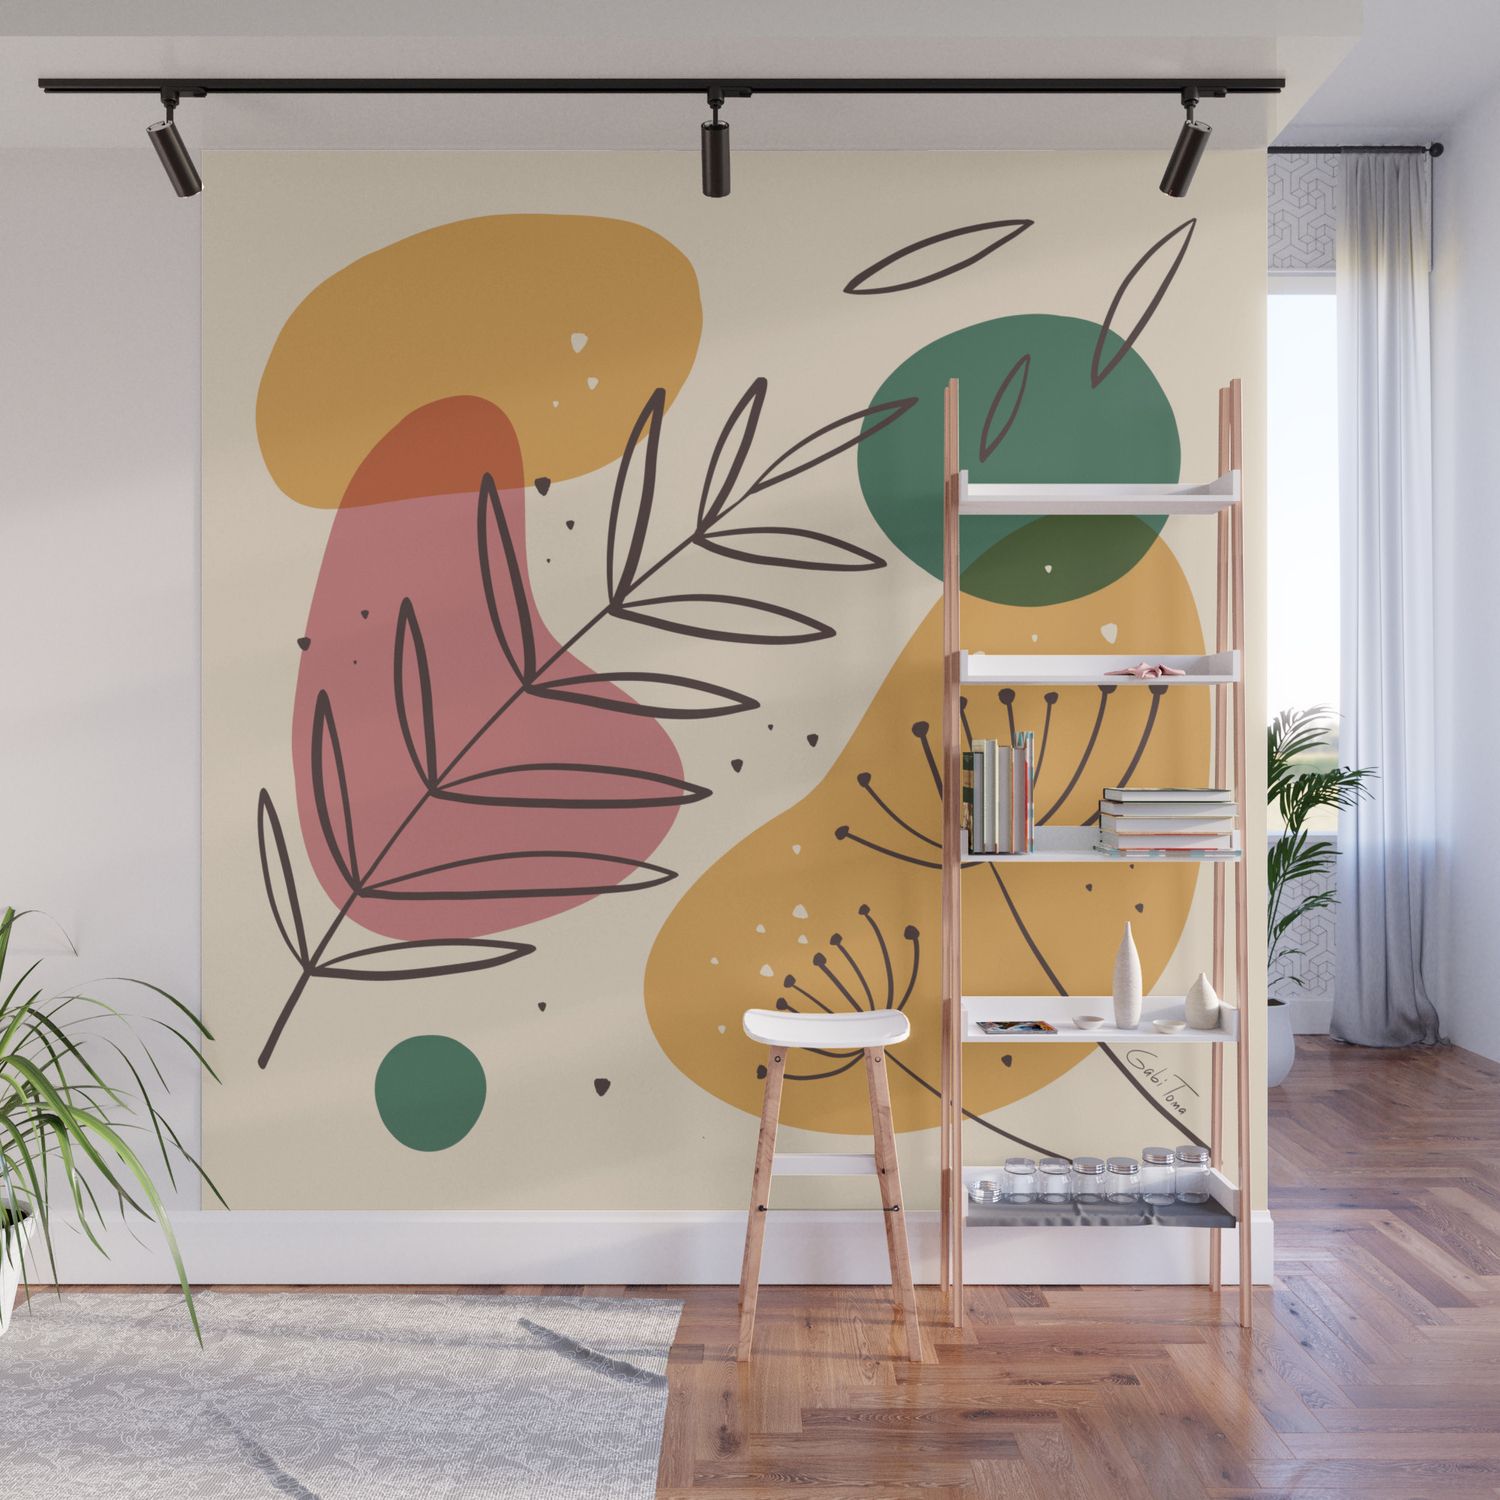 Colorful Abstract Shapes And Plants Design Wall Muralgabi Toma |  Society6 Pertaining To Most Popular Abstract Plant Wall Art (View 5 of 20)